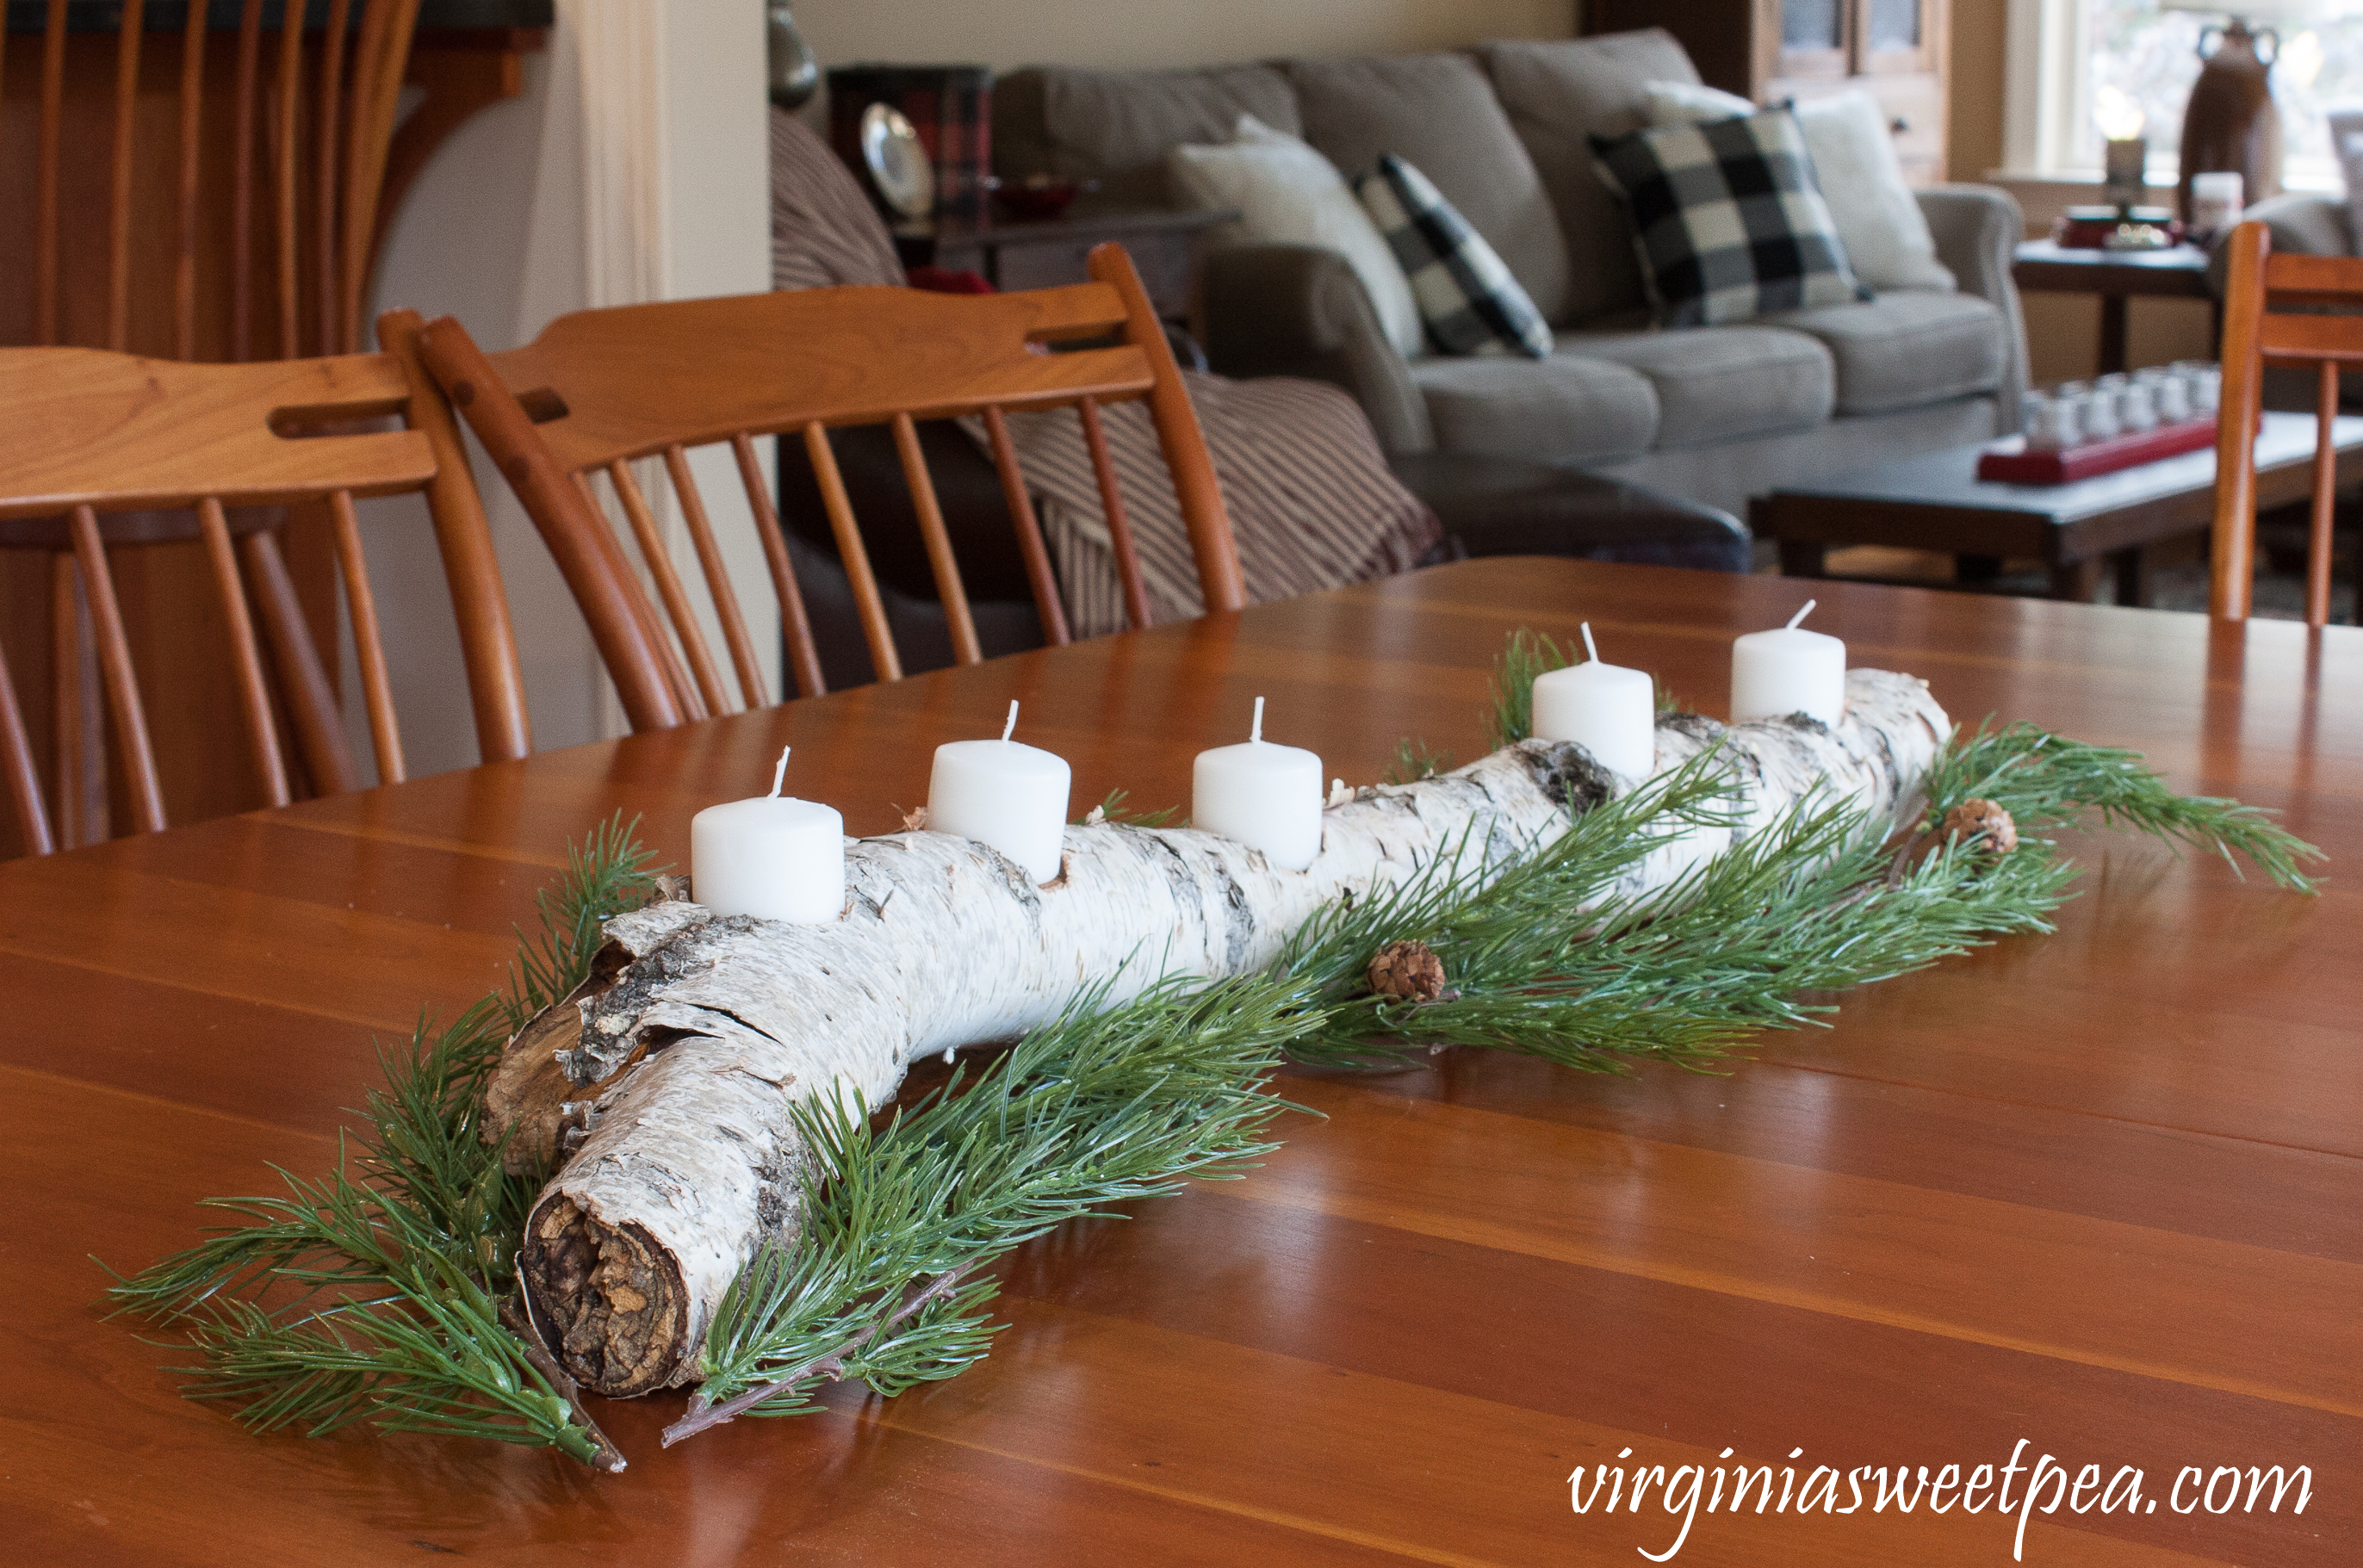 Learn how to make a yule log to use for winter decor in your home. #yulelog #diy #woodworking